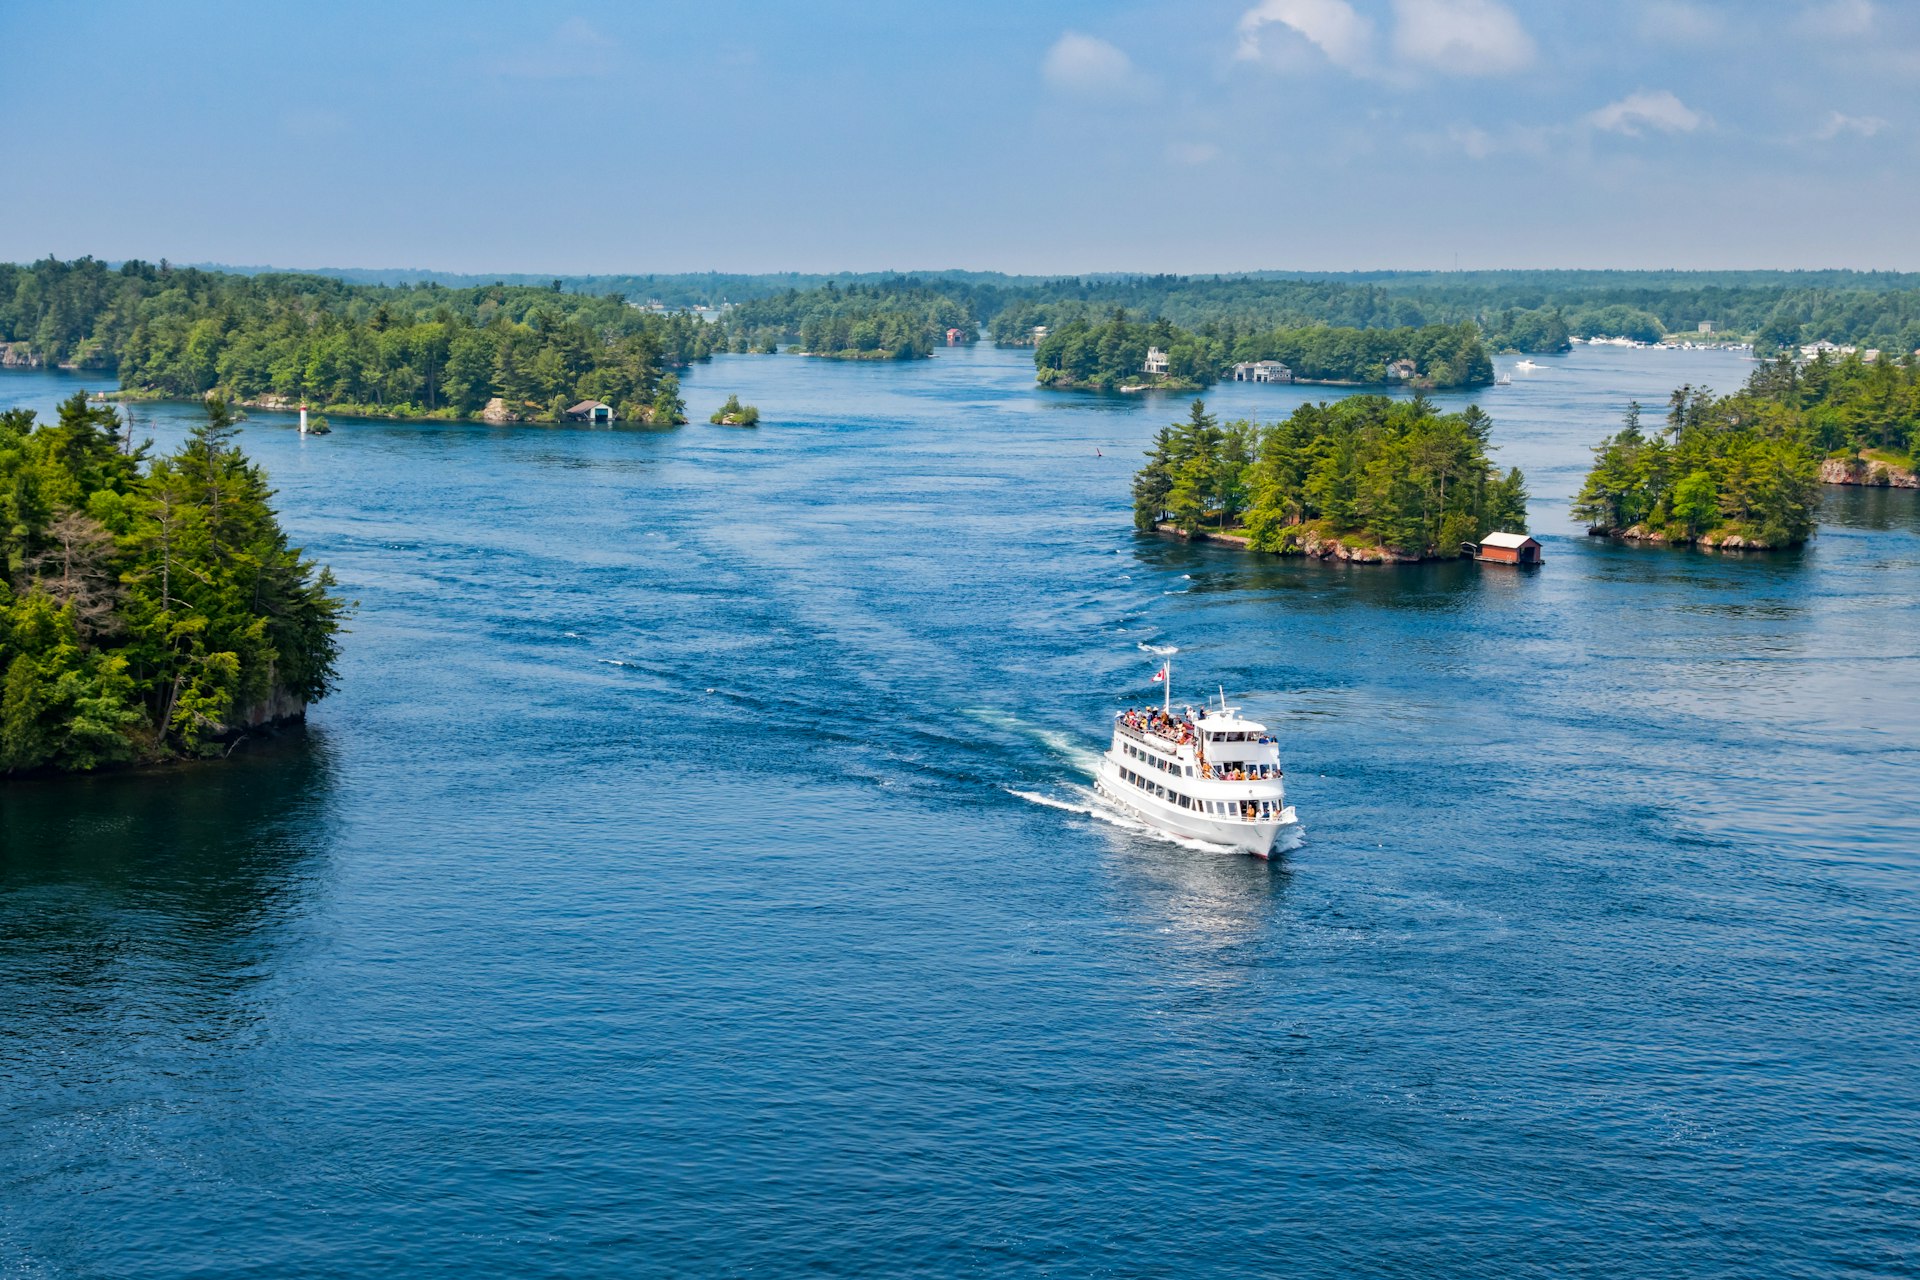 Photo taken from above of a tour boat with tourists passing between islands at Thousand Islands National Park, St Lawrence River, located between Ontario, Canada, and New York State, USA.